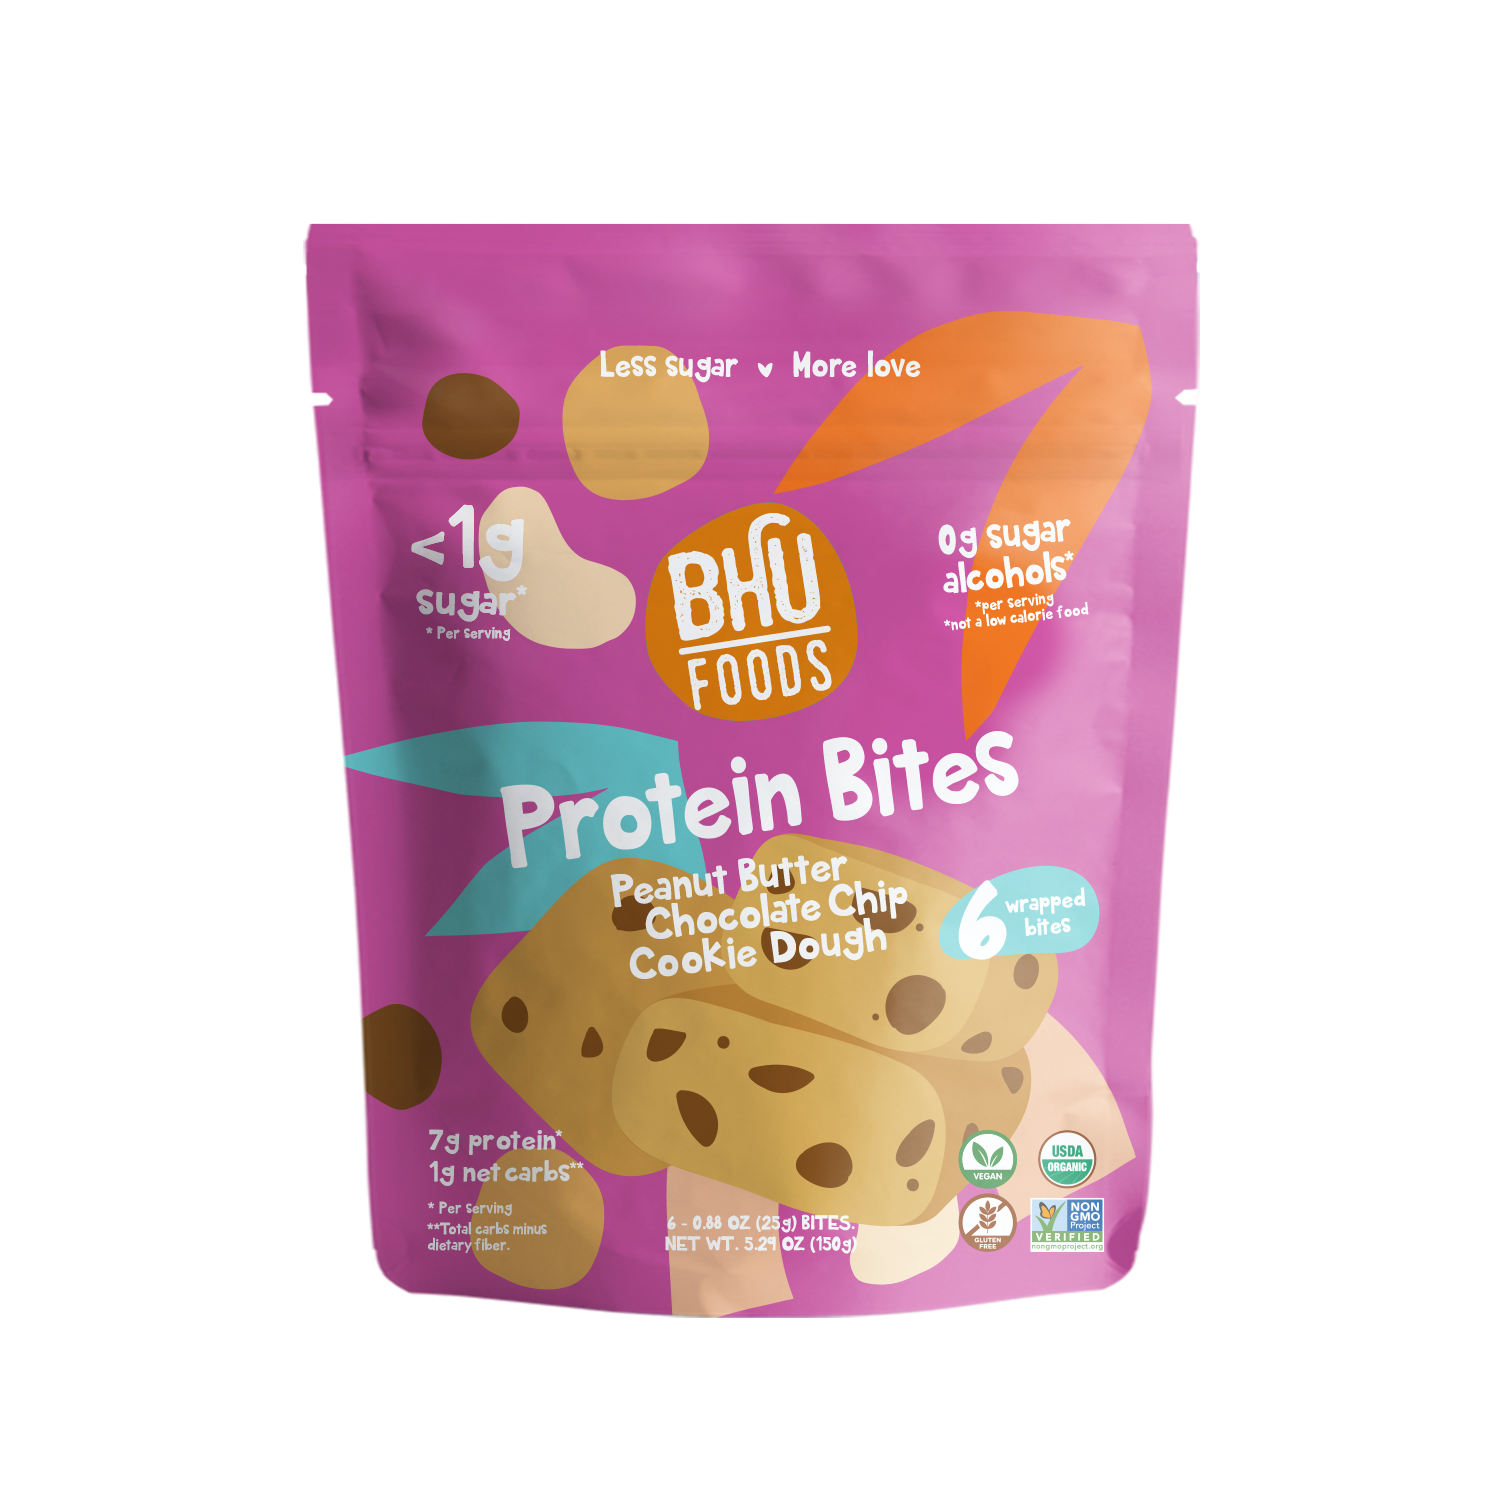 BHU Foods Protein Bites - Peanut Butter Chocolate Chip Cookie Dough 6 innerpacks per case 5.3 oz